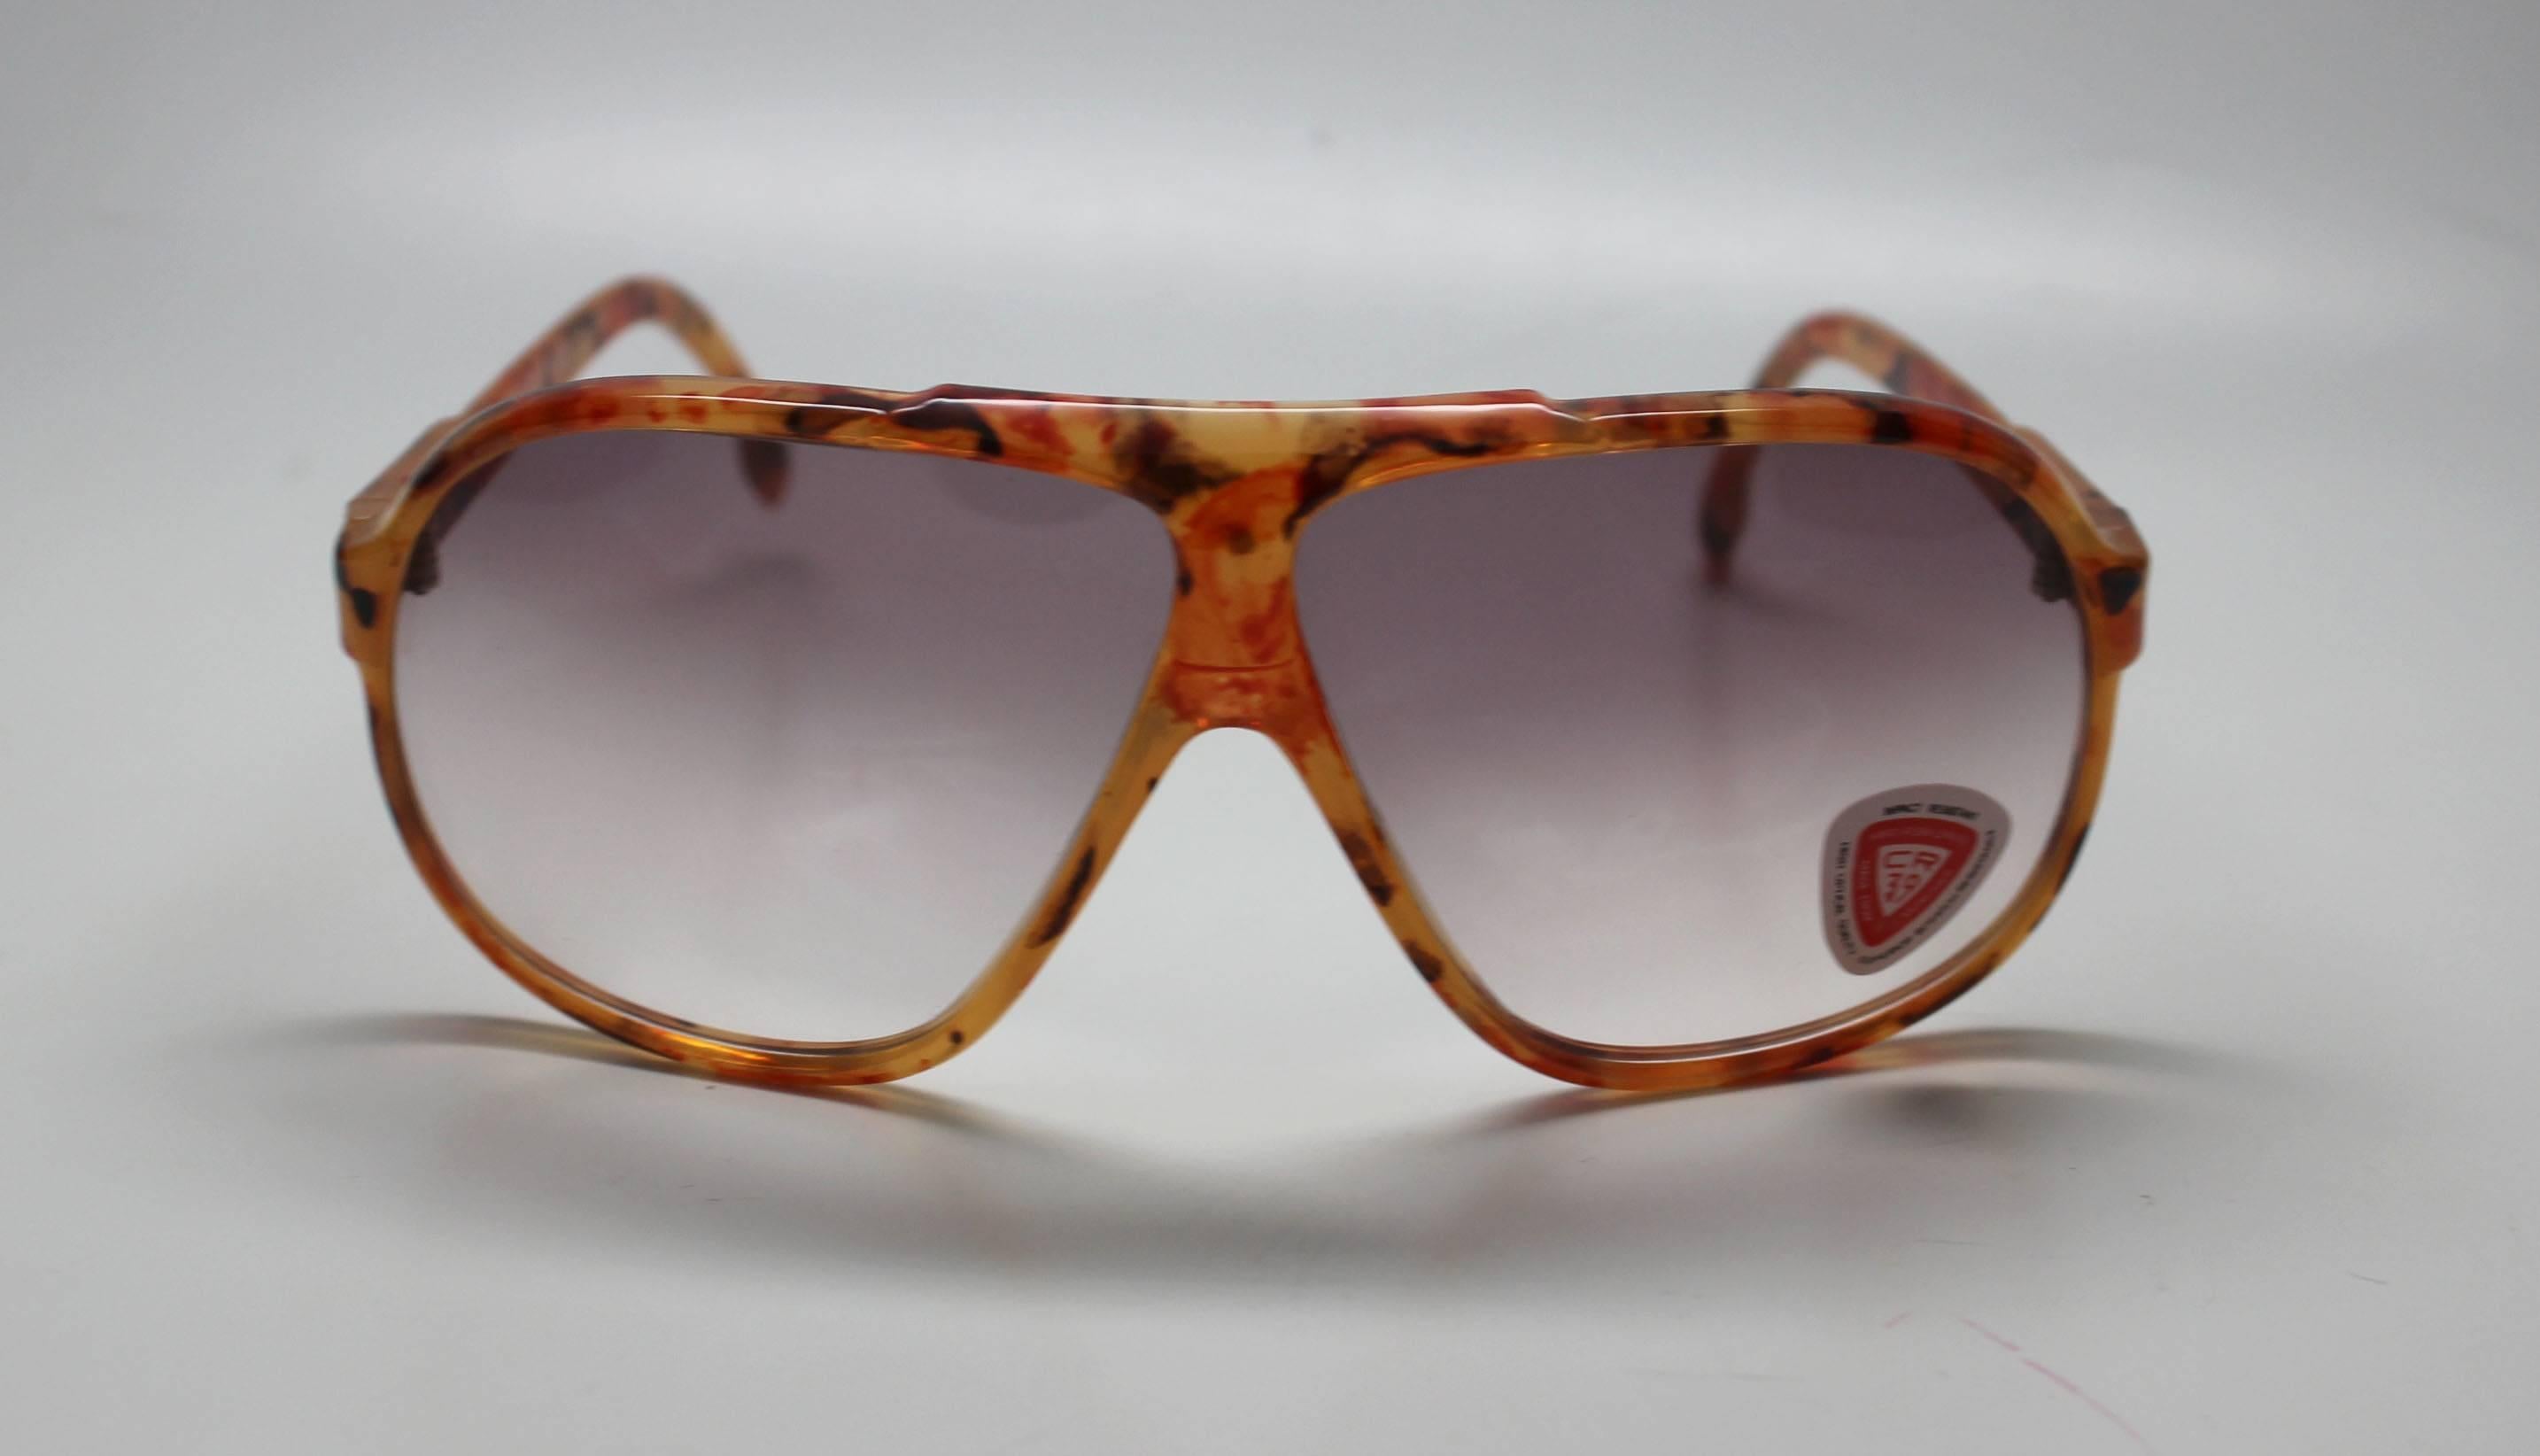 This pair of shades comes from a collection of sunglasses that had been warehoused since the late 1970's. They are in good quality, the frames were made in Italy. The style is very au courant to todays trends. 